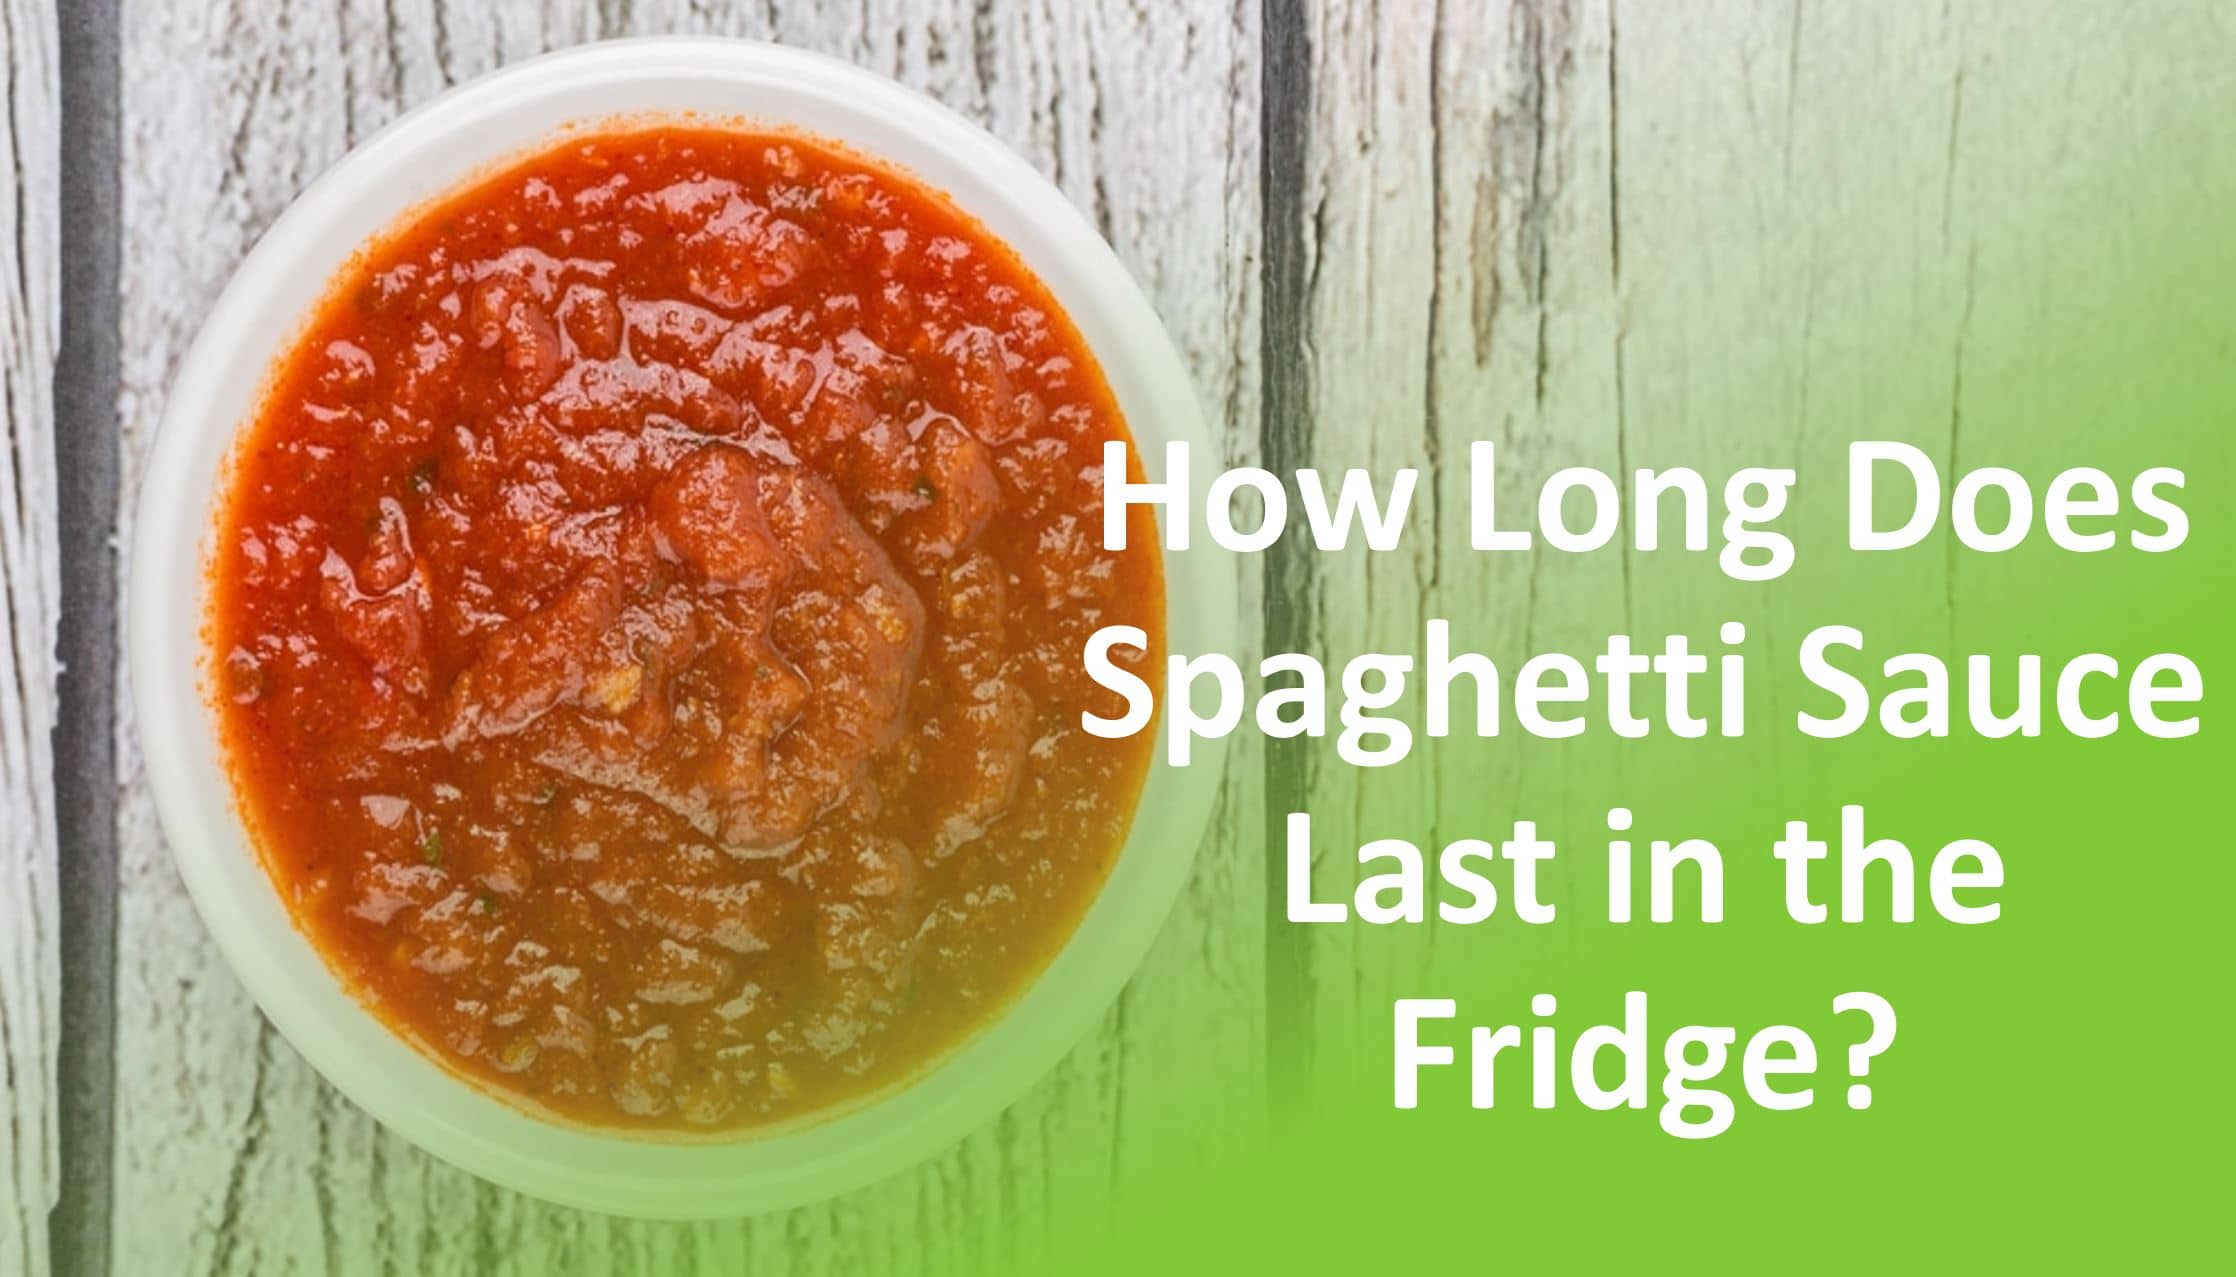 How Long Does Pasta Sauce Last In The Fridge?